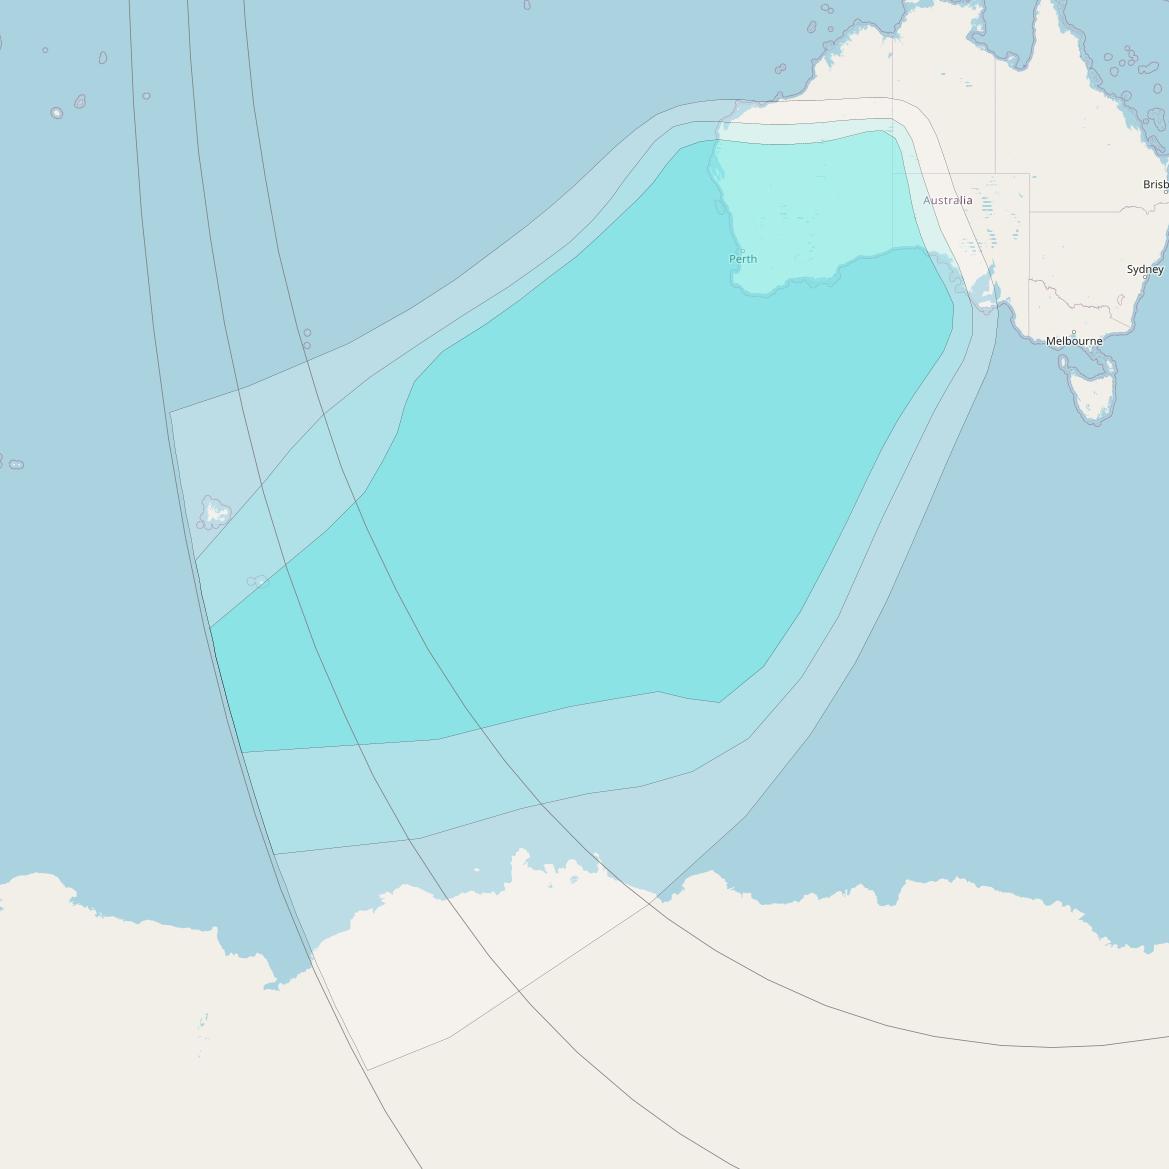 Inmarsat-4F1 at 143° E downlink L-band R013 Regional Spot beam coverage map